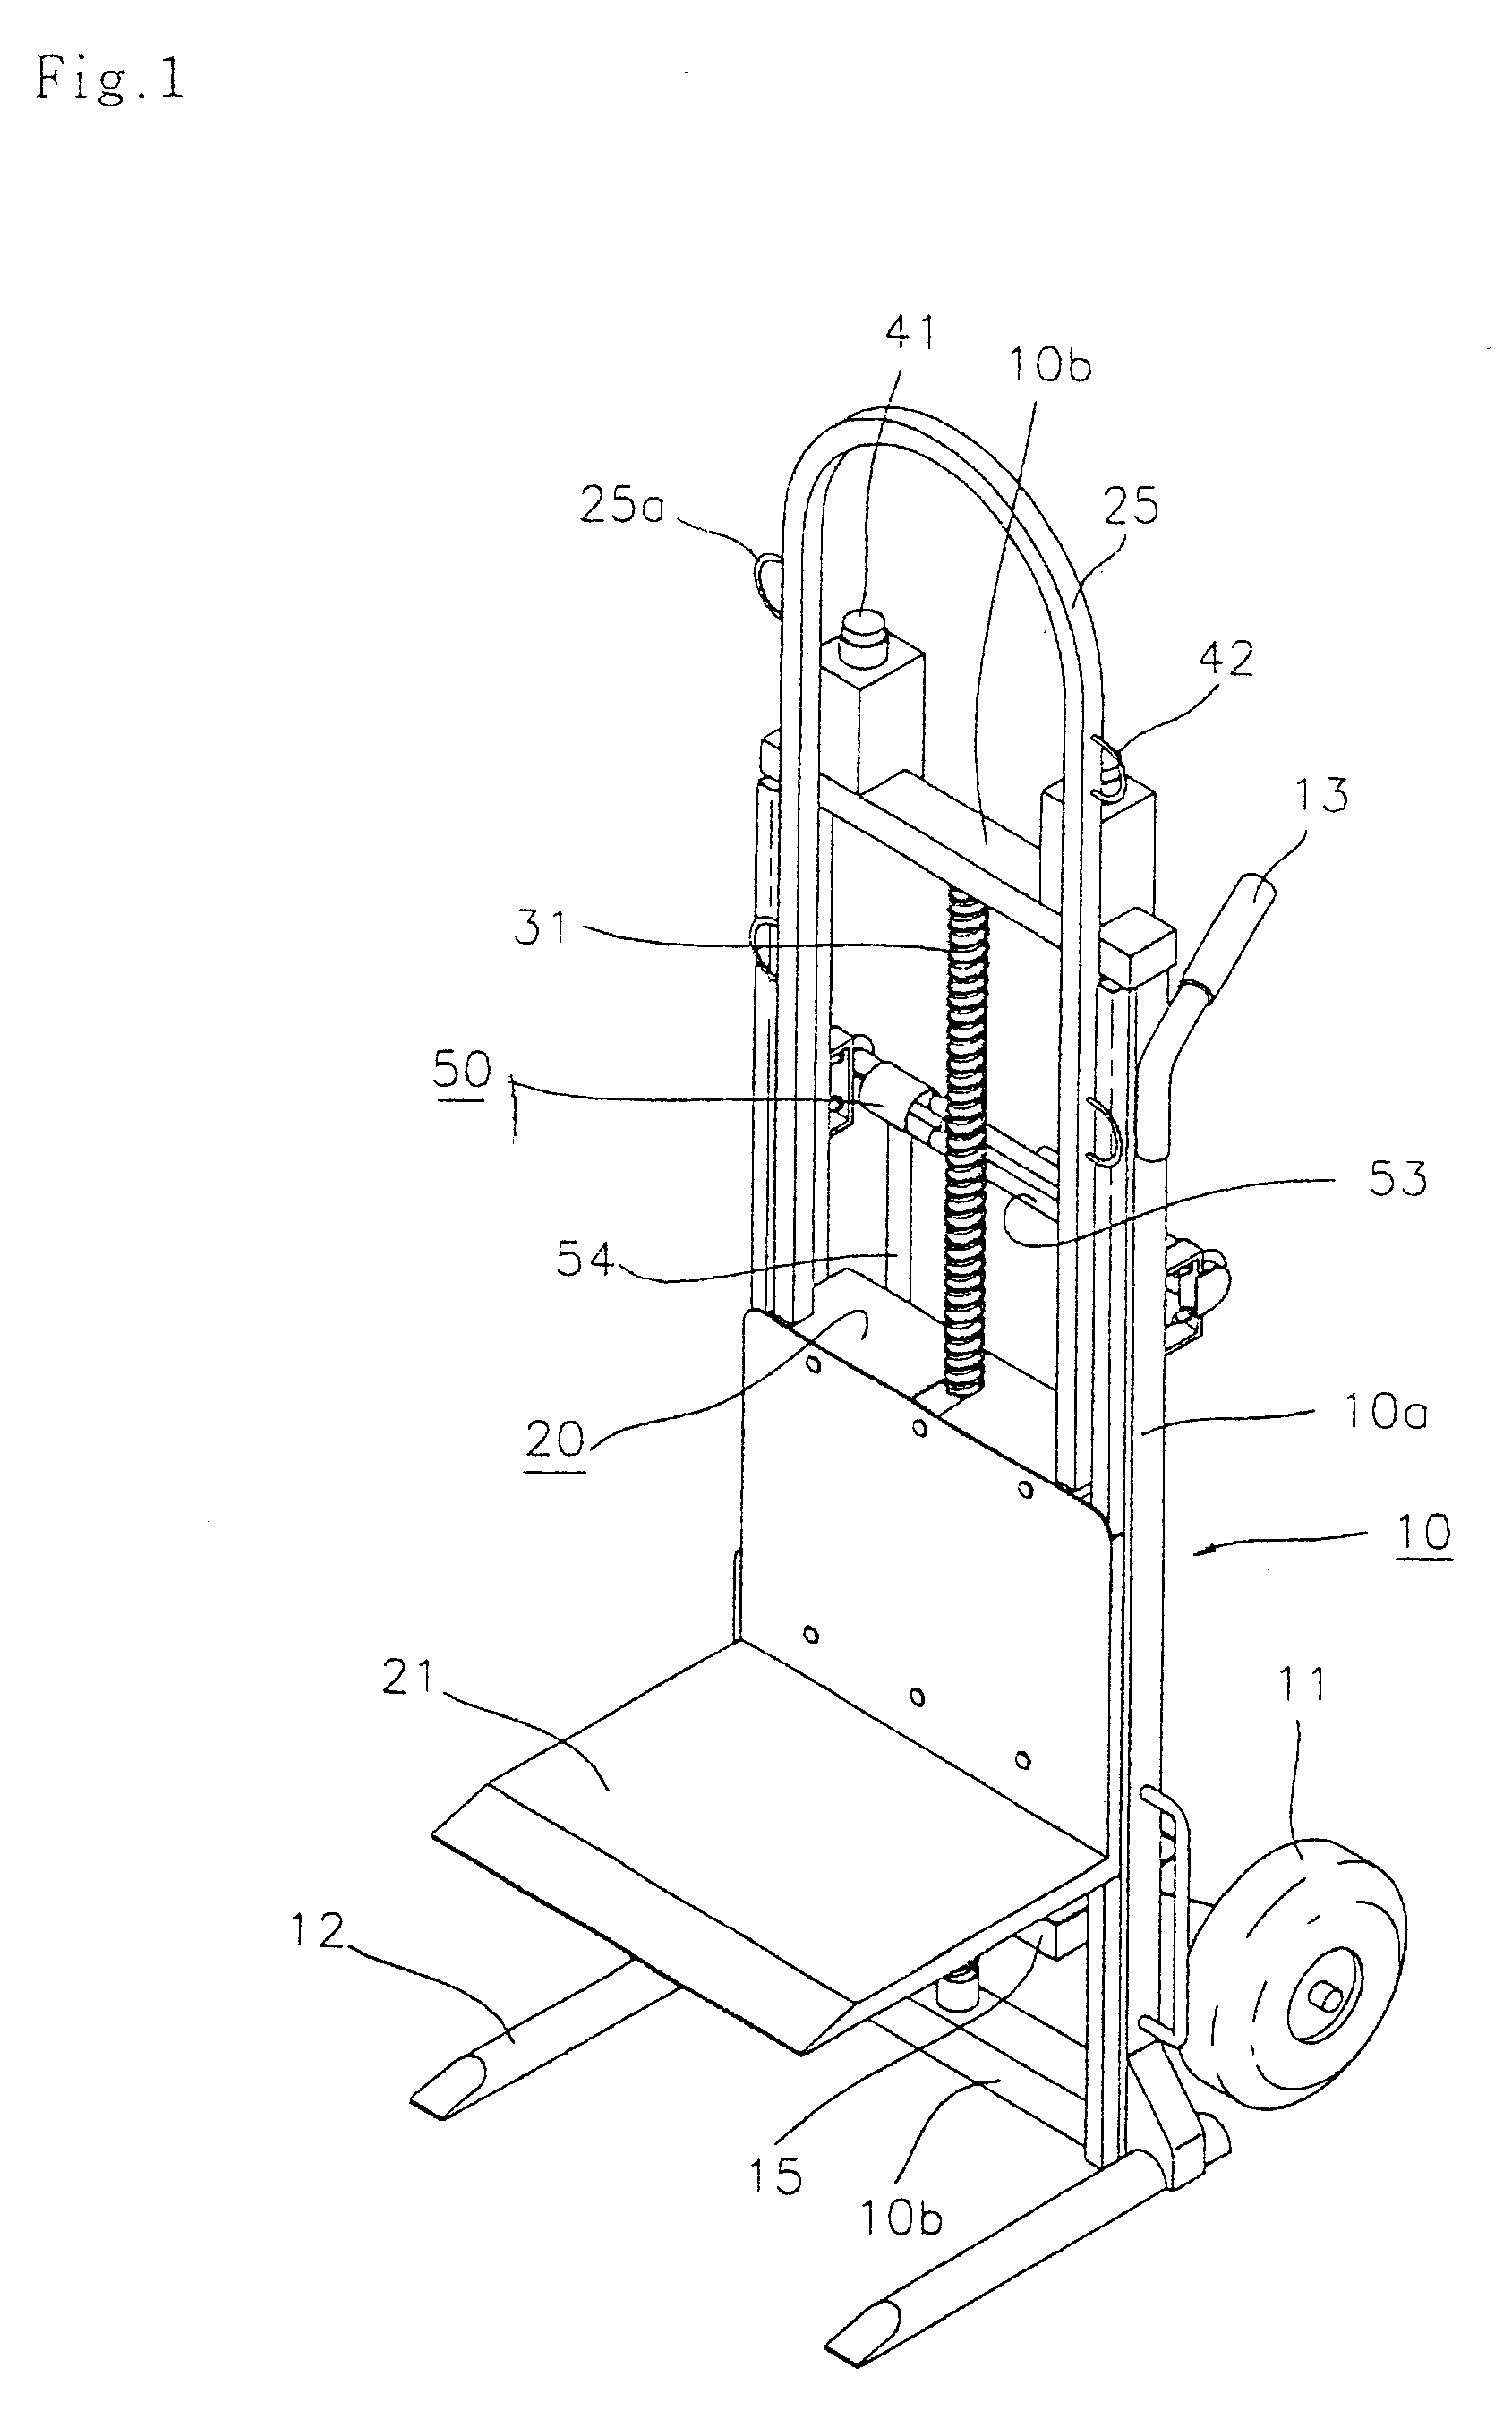 Hand truck with electrically operated lifting platform